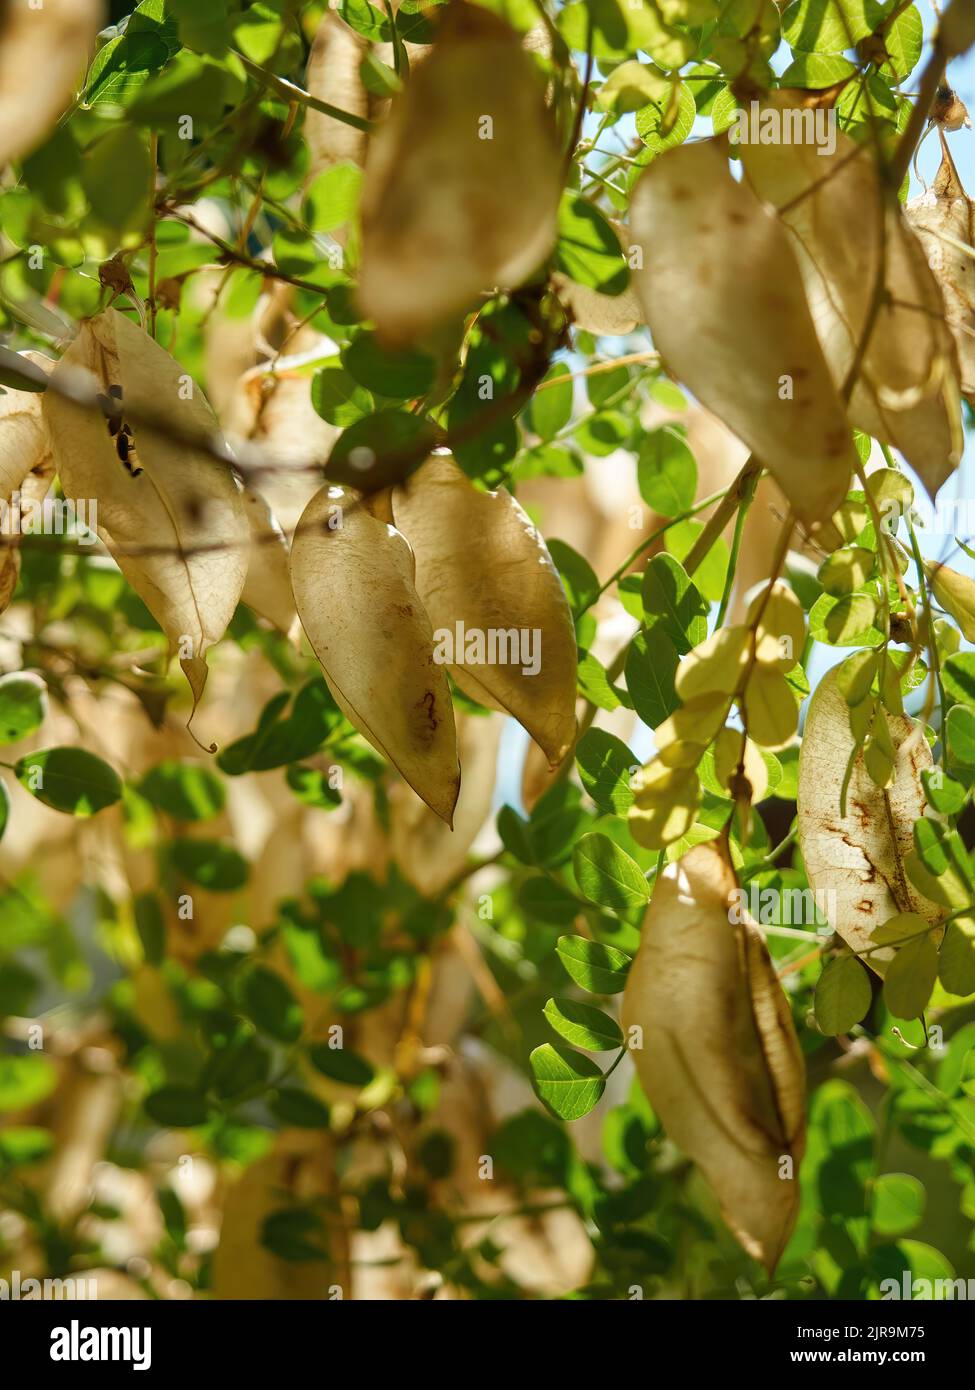 Calm and quiet - the seed pods and leaves of a bladder senna tree from inside the canopy, with leaf-filtered summer sunlight glowing through the pods. Stock Photo